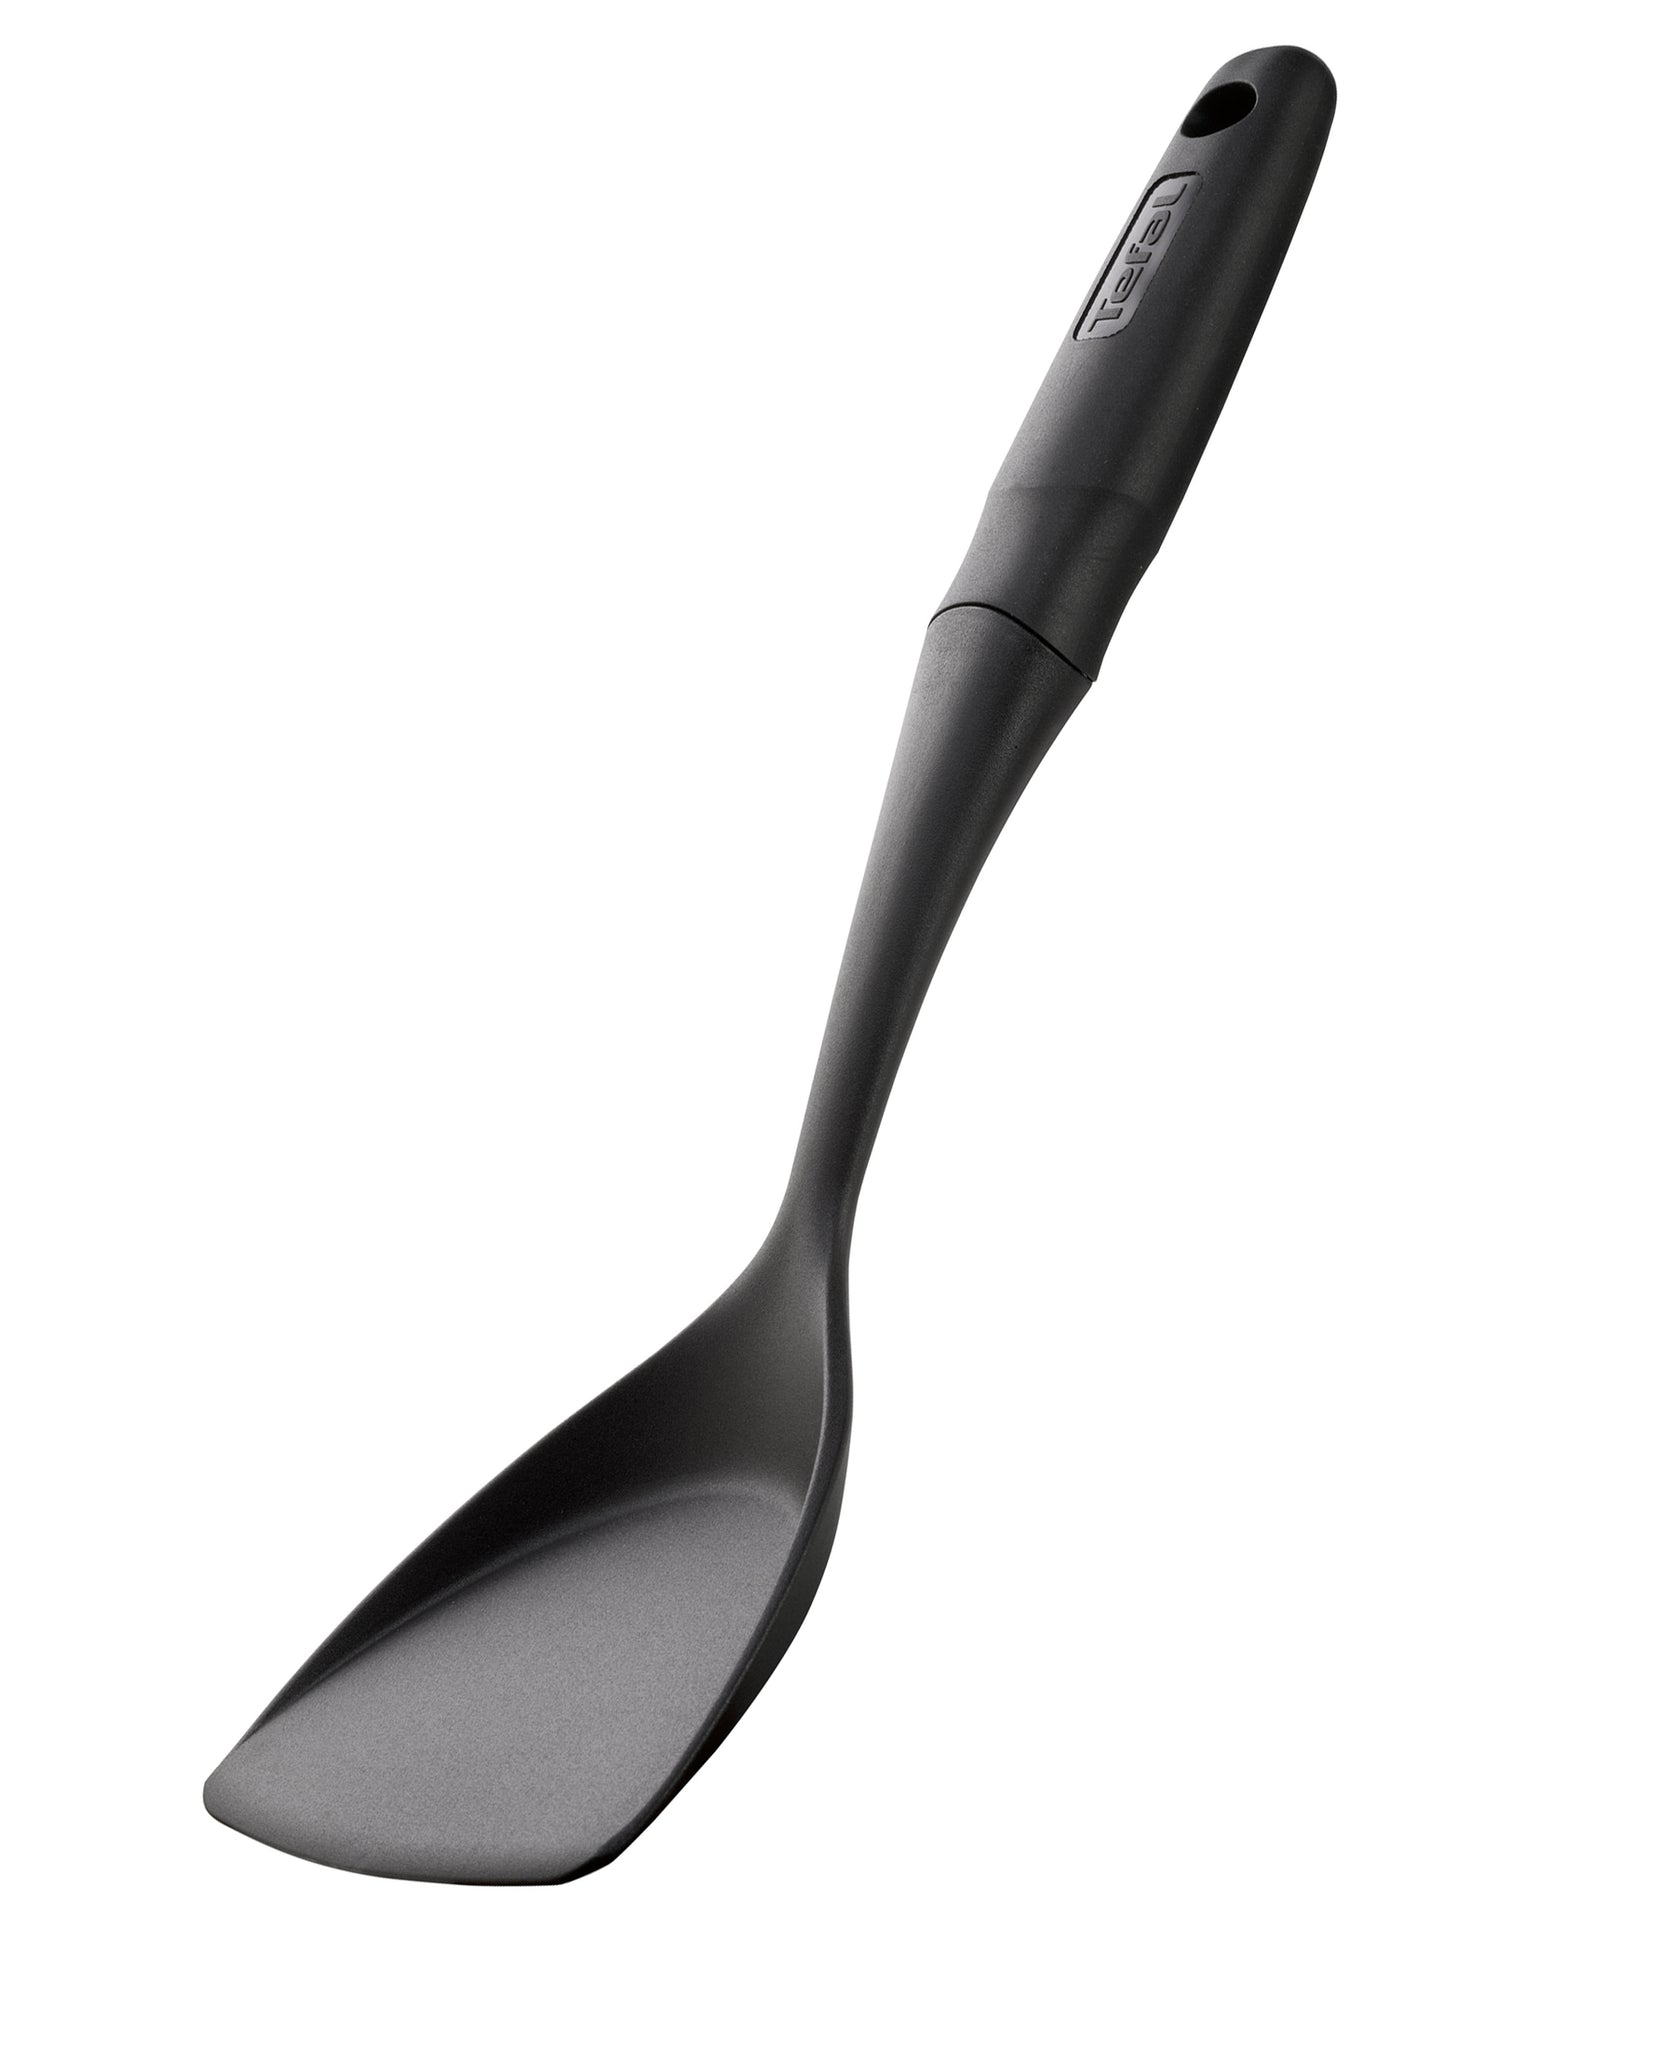 Tefal Comfort Touch Work Spatula - Black